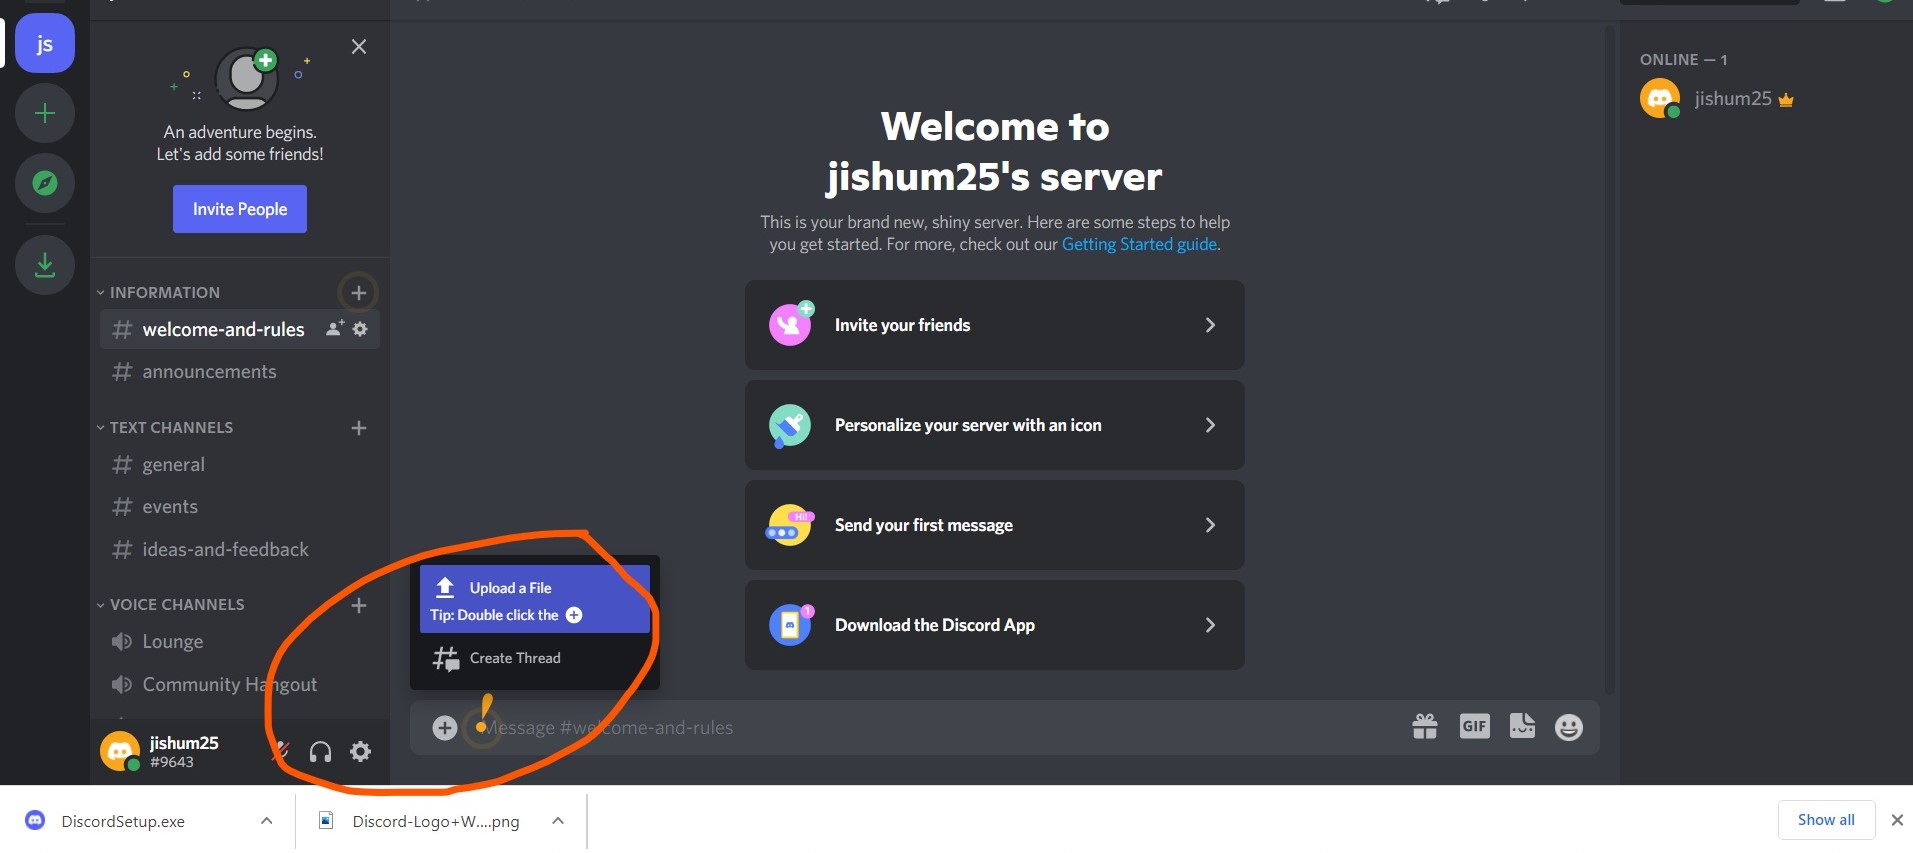 Launch Discord on your pc